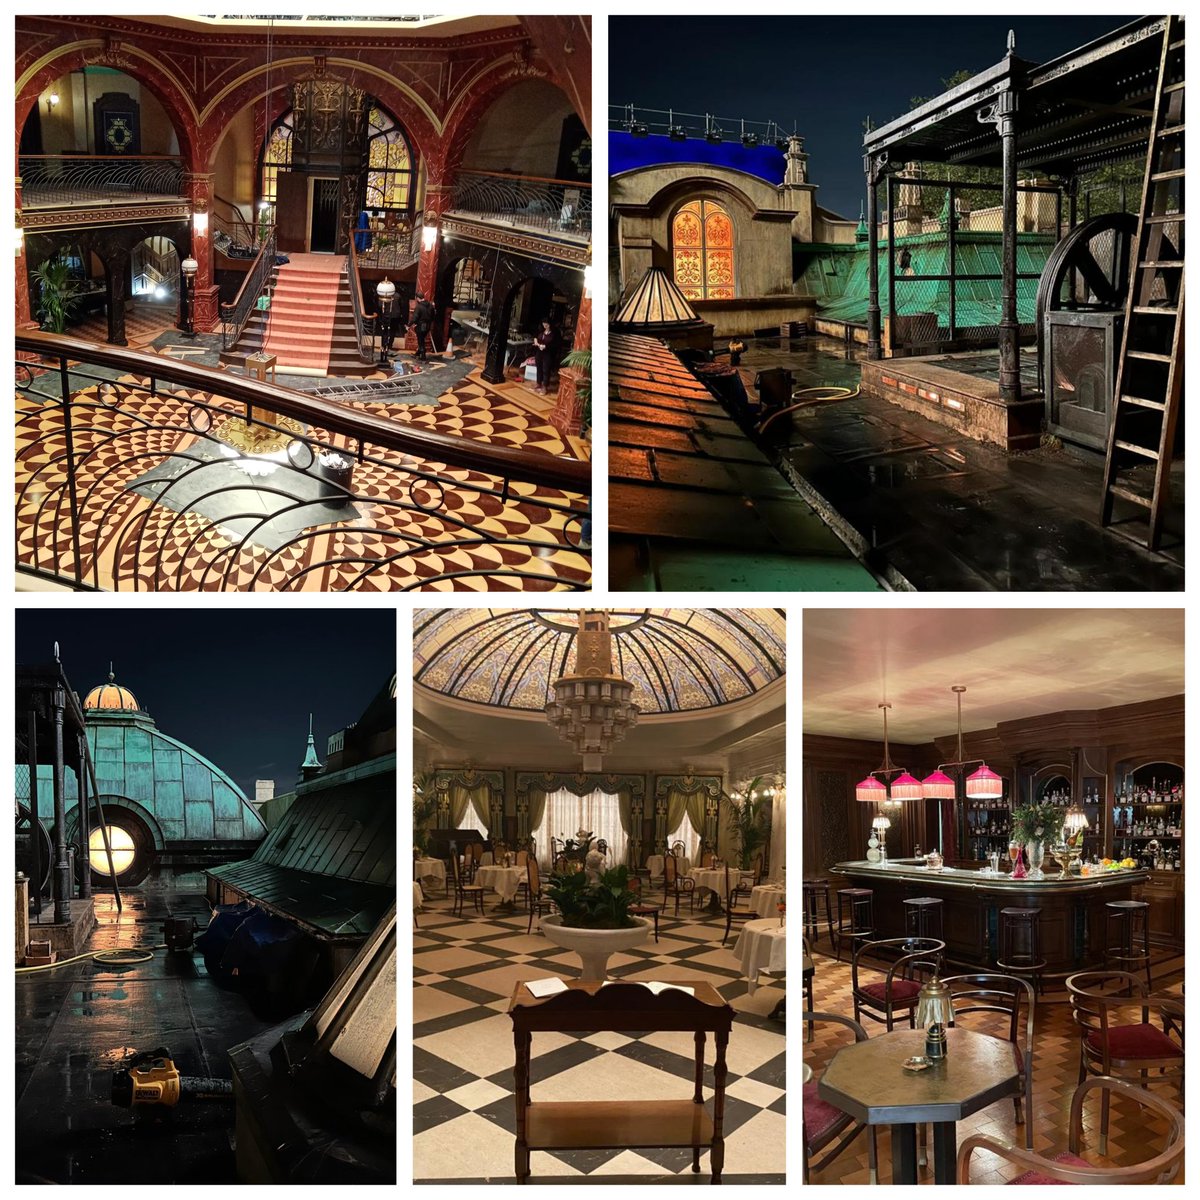 Here are some pictures of the sets I built for the new @ParamountPlusUK @AmazonUK TV series A Gentleman In Moscow starring #EwanMcgregor #setbulids #BehindTheScenes #AGentlemanInMosco